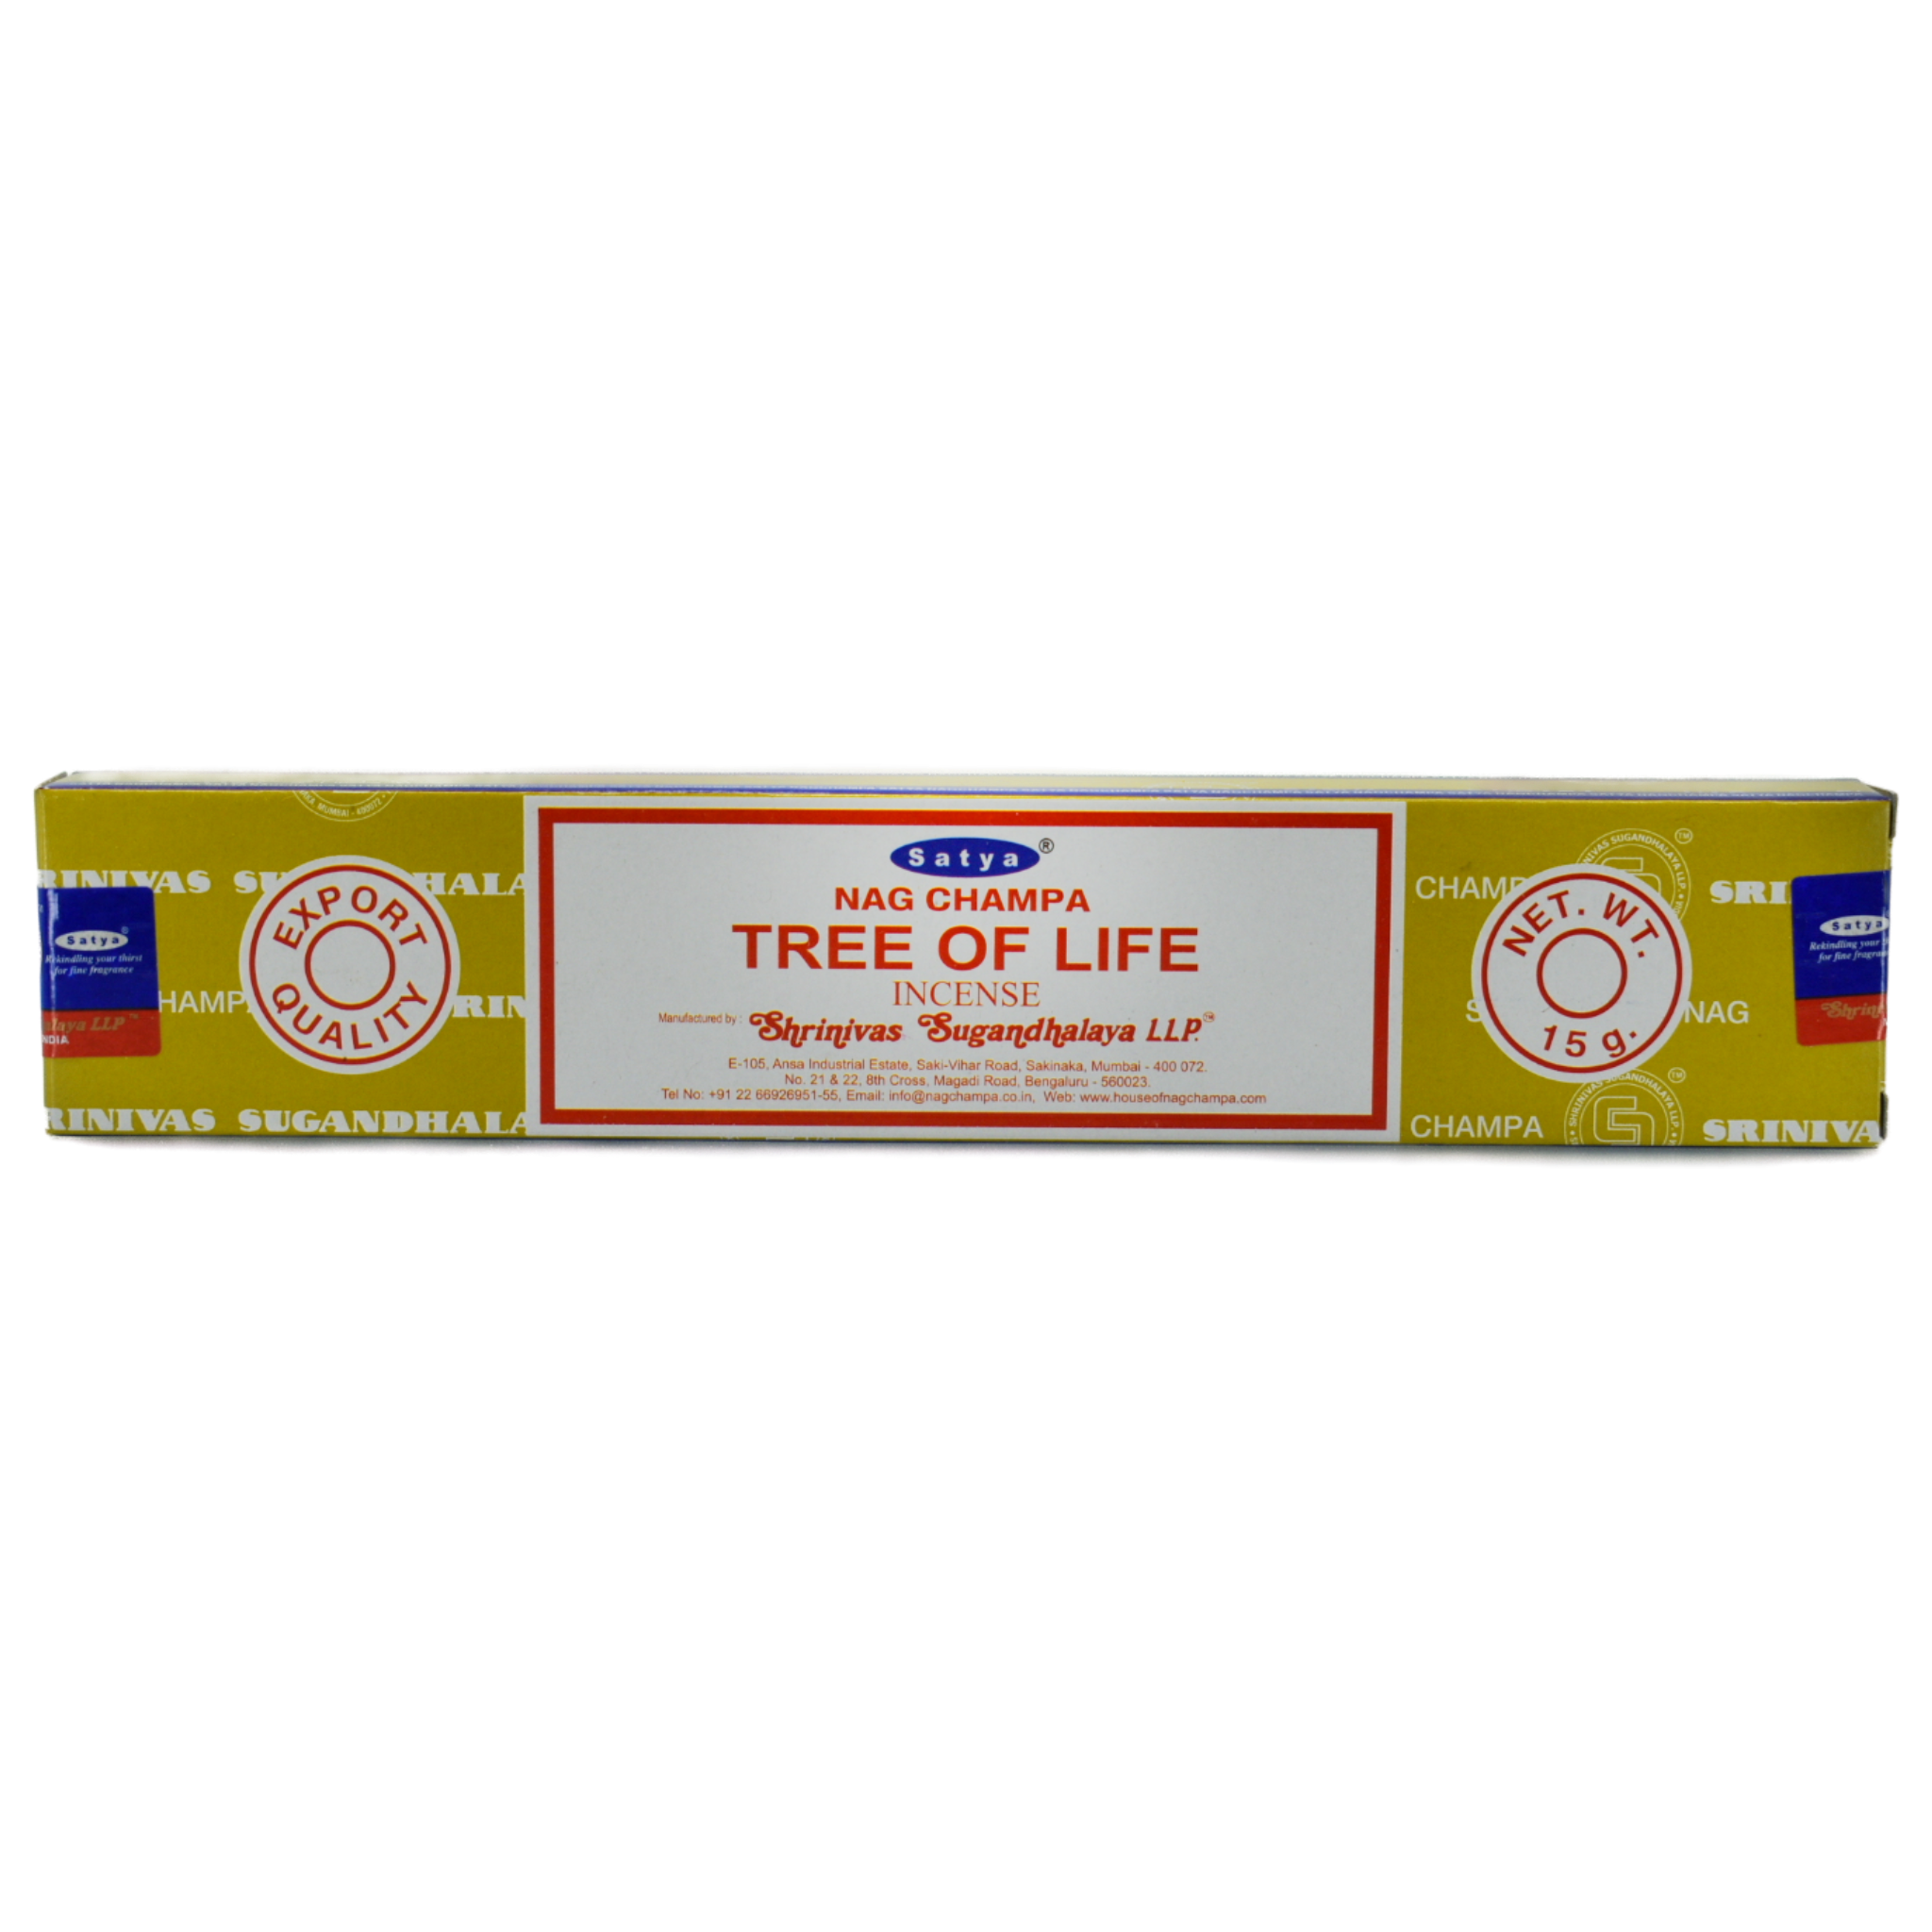 Tree of Life Incense Sticks.  The cover is yellowish green color with line design made of company words.  The center has a white rectangle  with a red frame within the border.  The company and title say Satya, Nag Champa, Tree of Life Incense.  There are two circles one on each side of the rectangle.  The left one says Export Quality and the right circle says Net. Weight 15 grams.